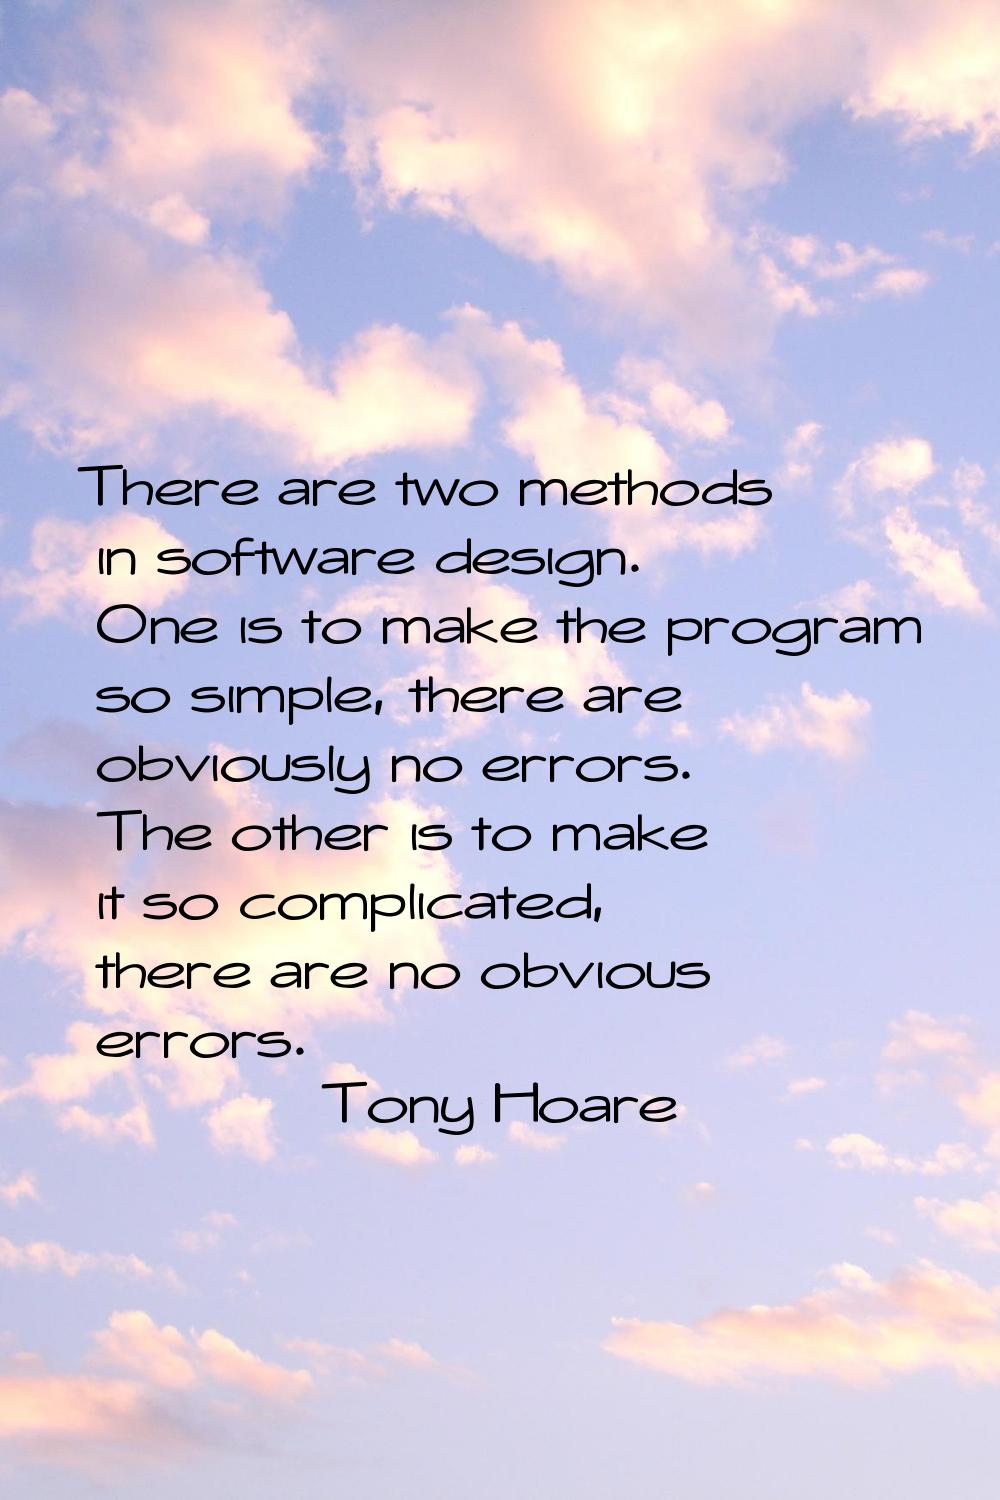 There are two methods in software design. One is to make the program so simple, there are obviously